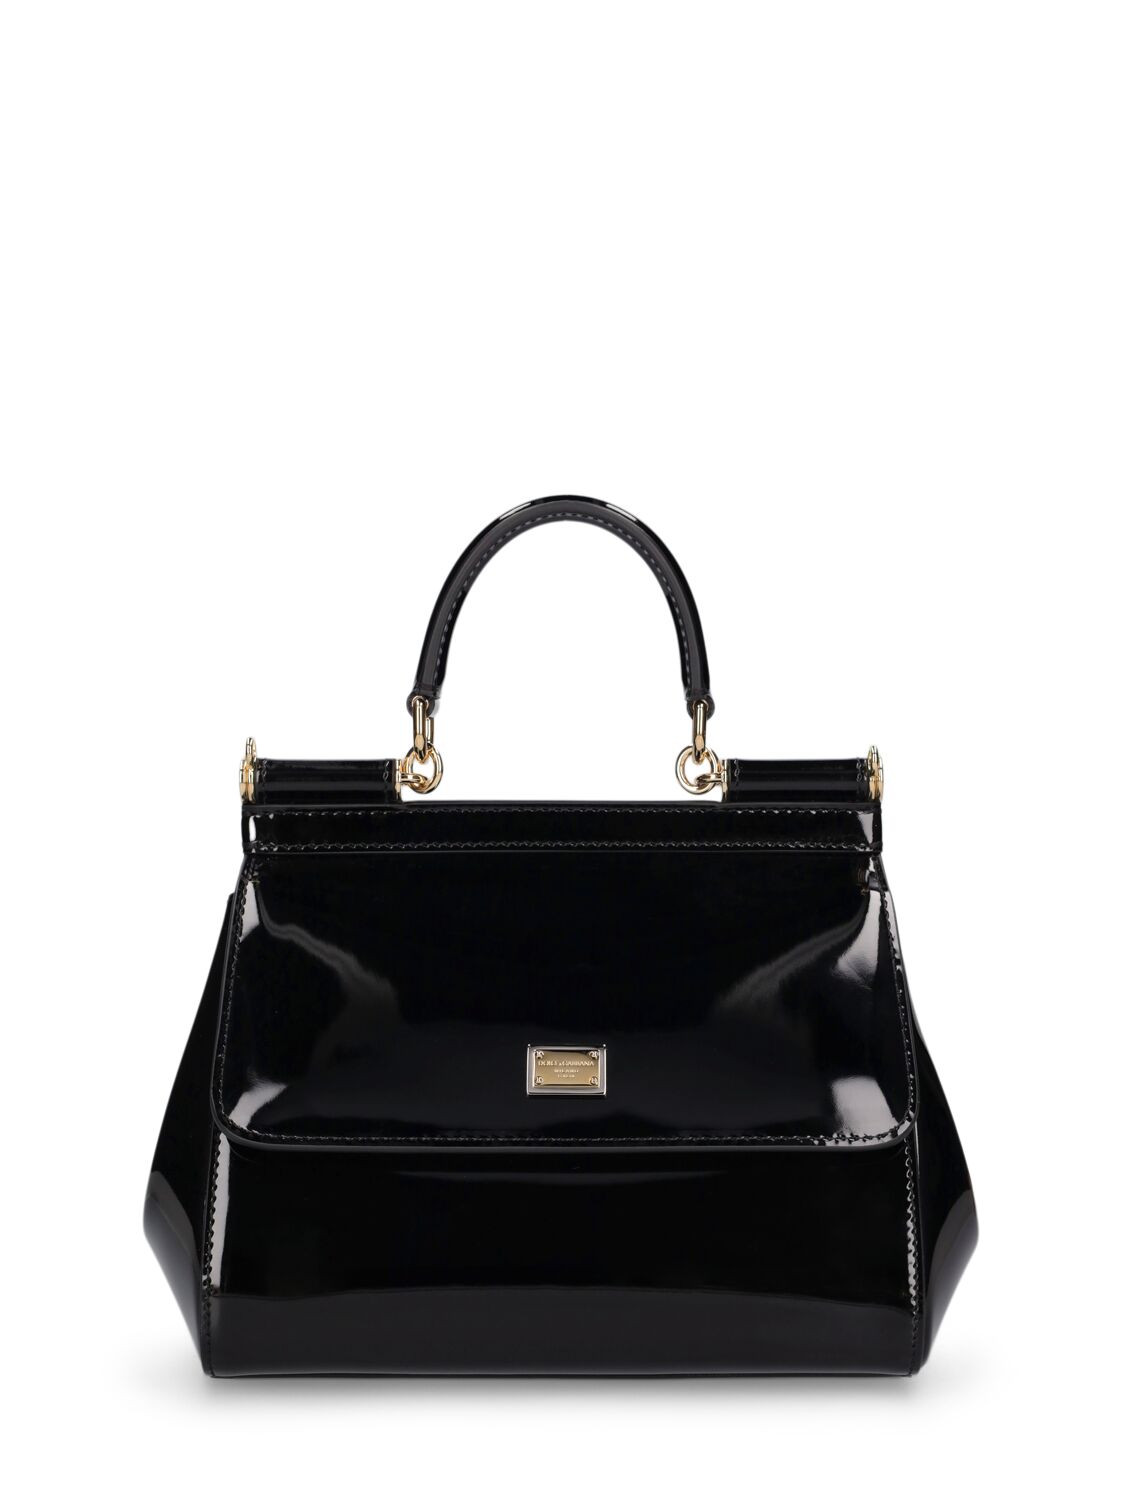 Dolce & Gabbana Small Sicily Leather Top Handle Bag In Black